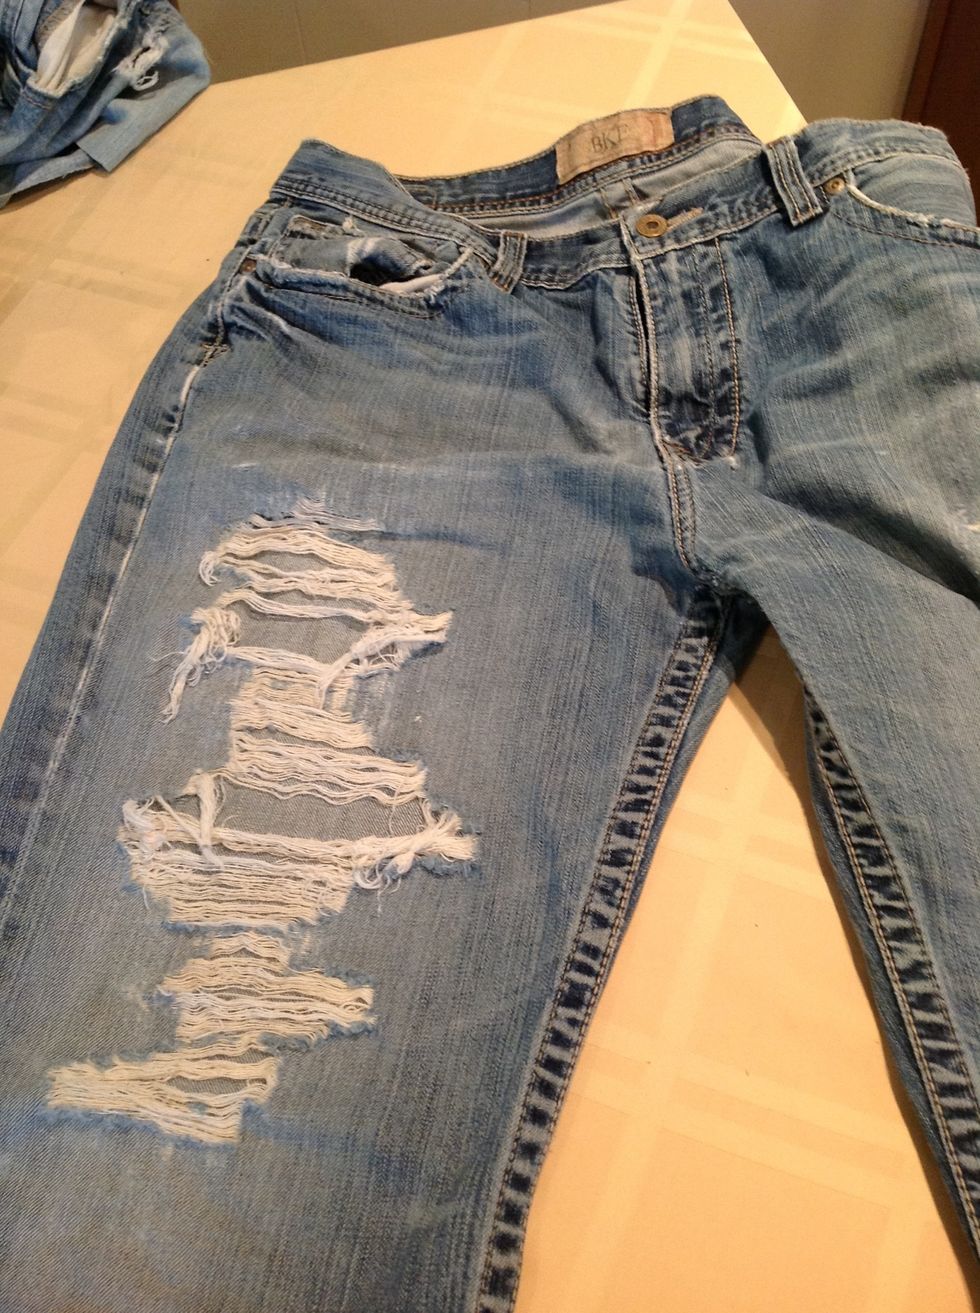 How to mend holes in torn/worn jeans - B+C Guides